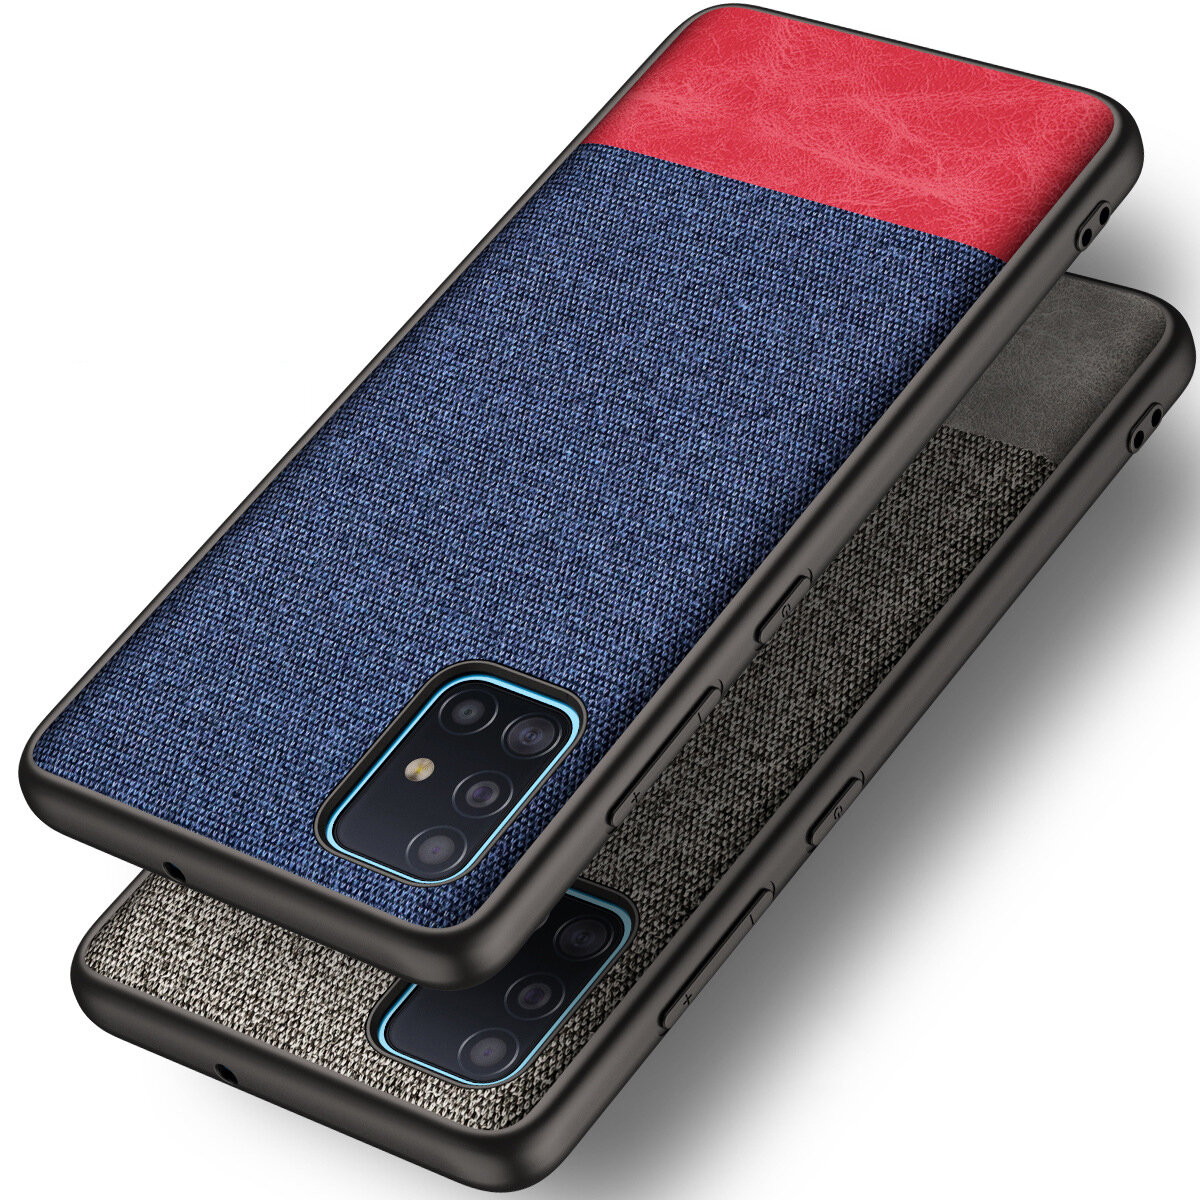 Bakeey Luxury Cotton Cloth Shockproof Anti-sweat Protective Case for Samsung Galaxy A71 2019